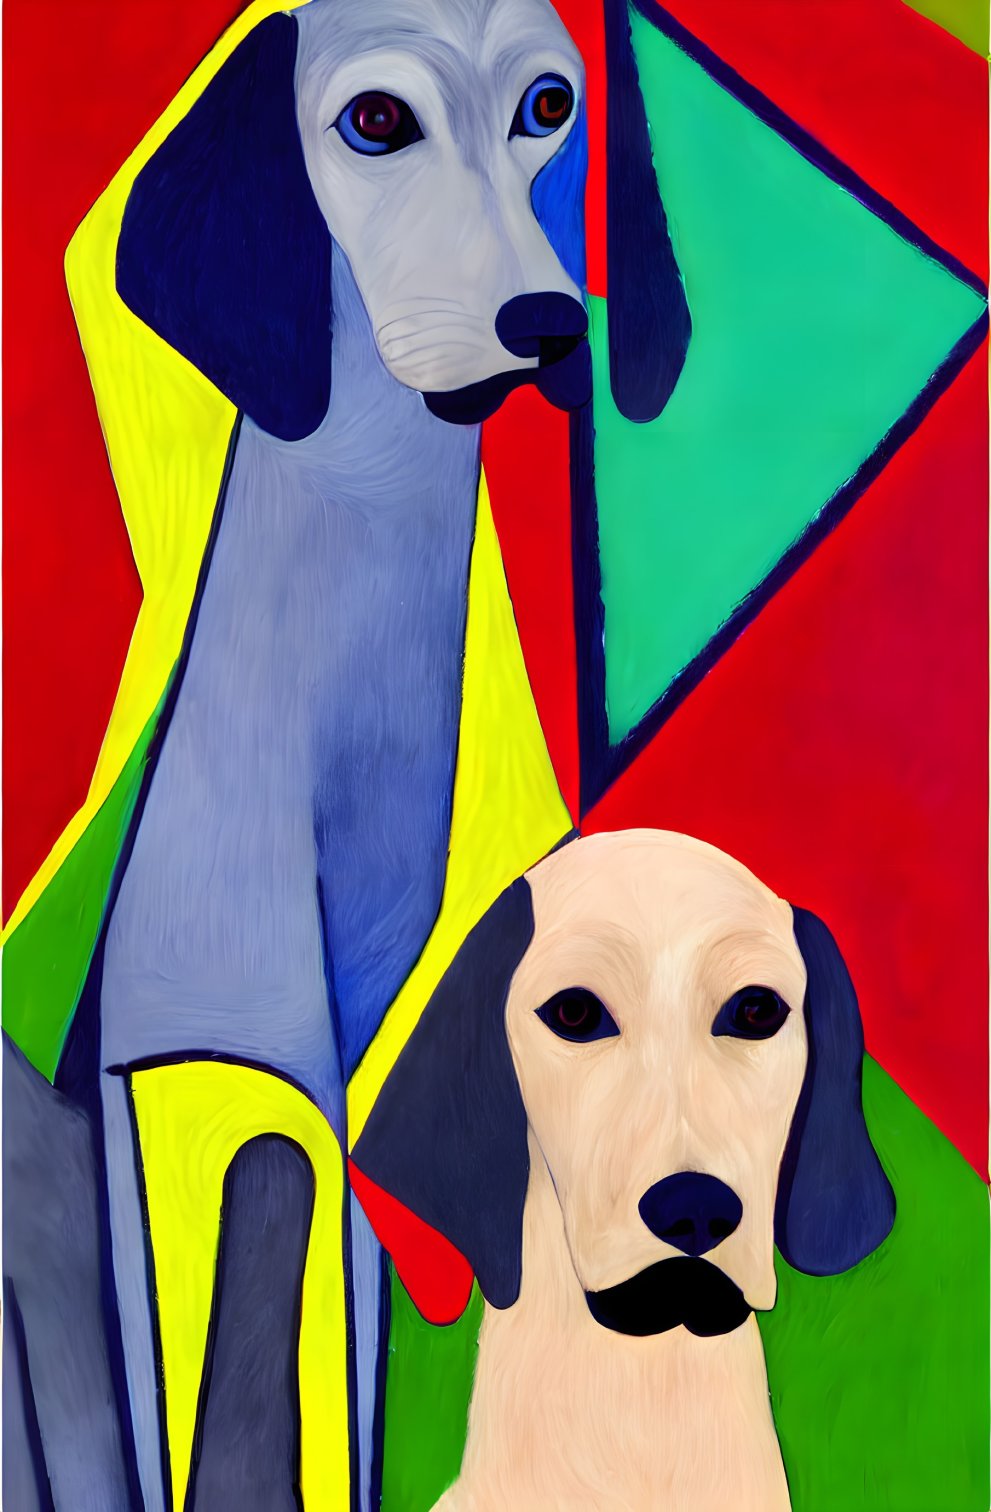 Colorful abstract painting featuring stylized dogs and geometric shapes